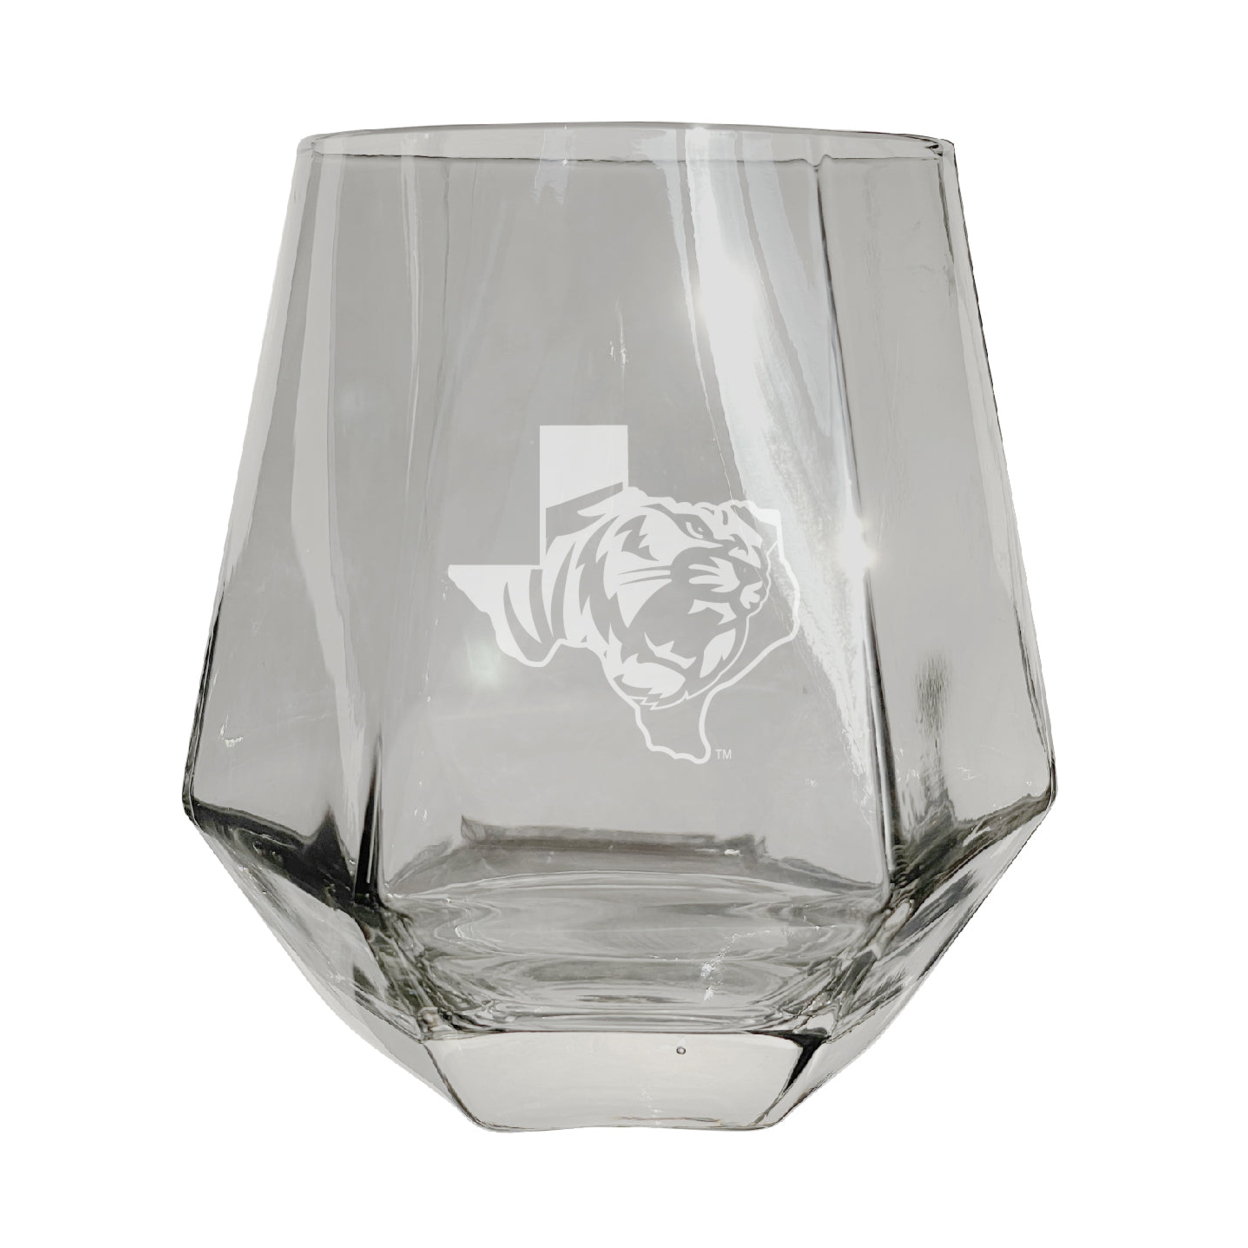 East Texas Baptist University Etched Diamond Cut Stemless 10 Ounce Wine Glass Clear